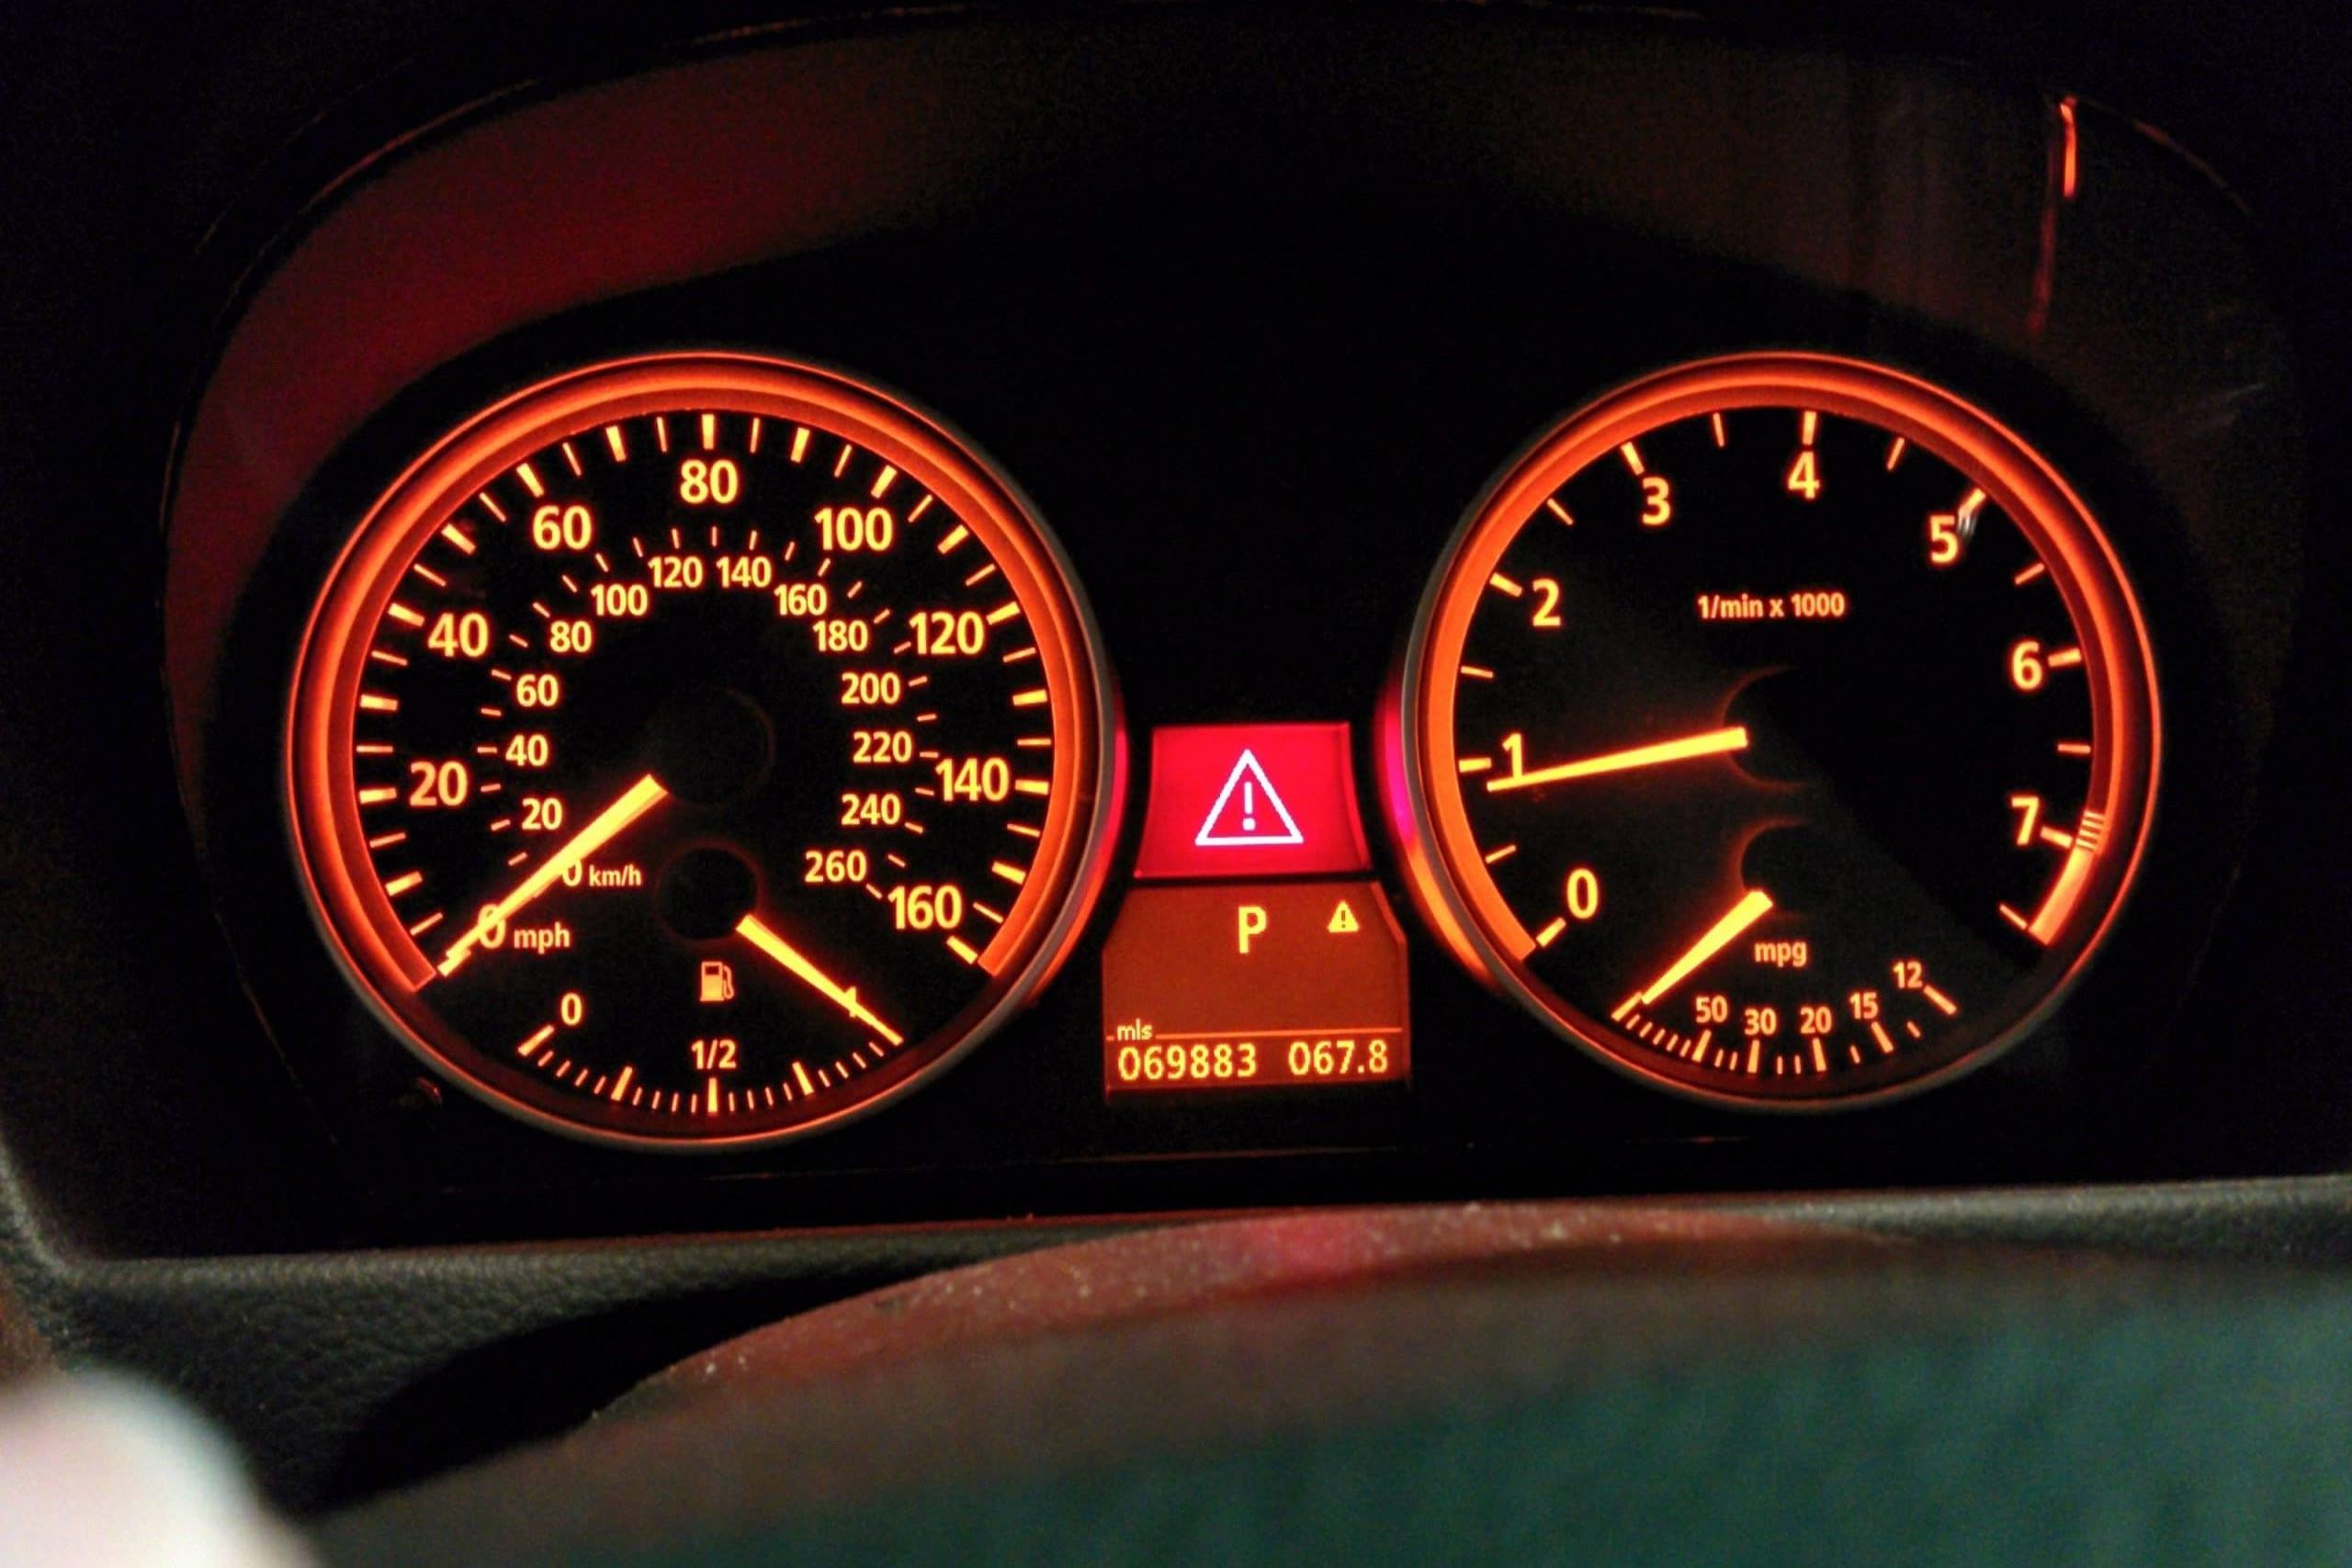 Decode The Mysterious BMW Warning Light: Triangle + Exclamation Point!